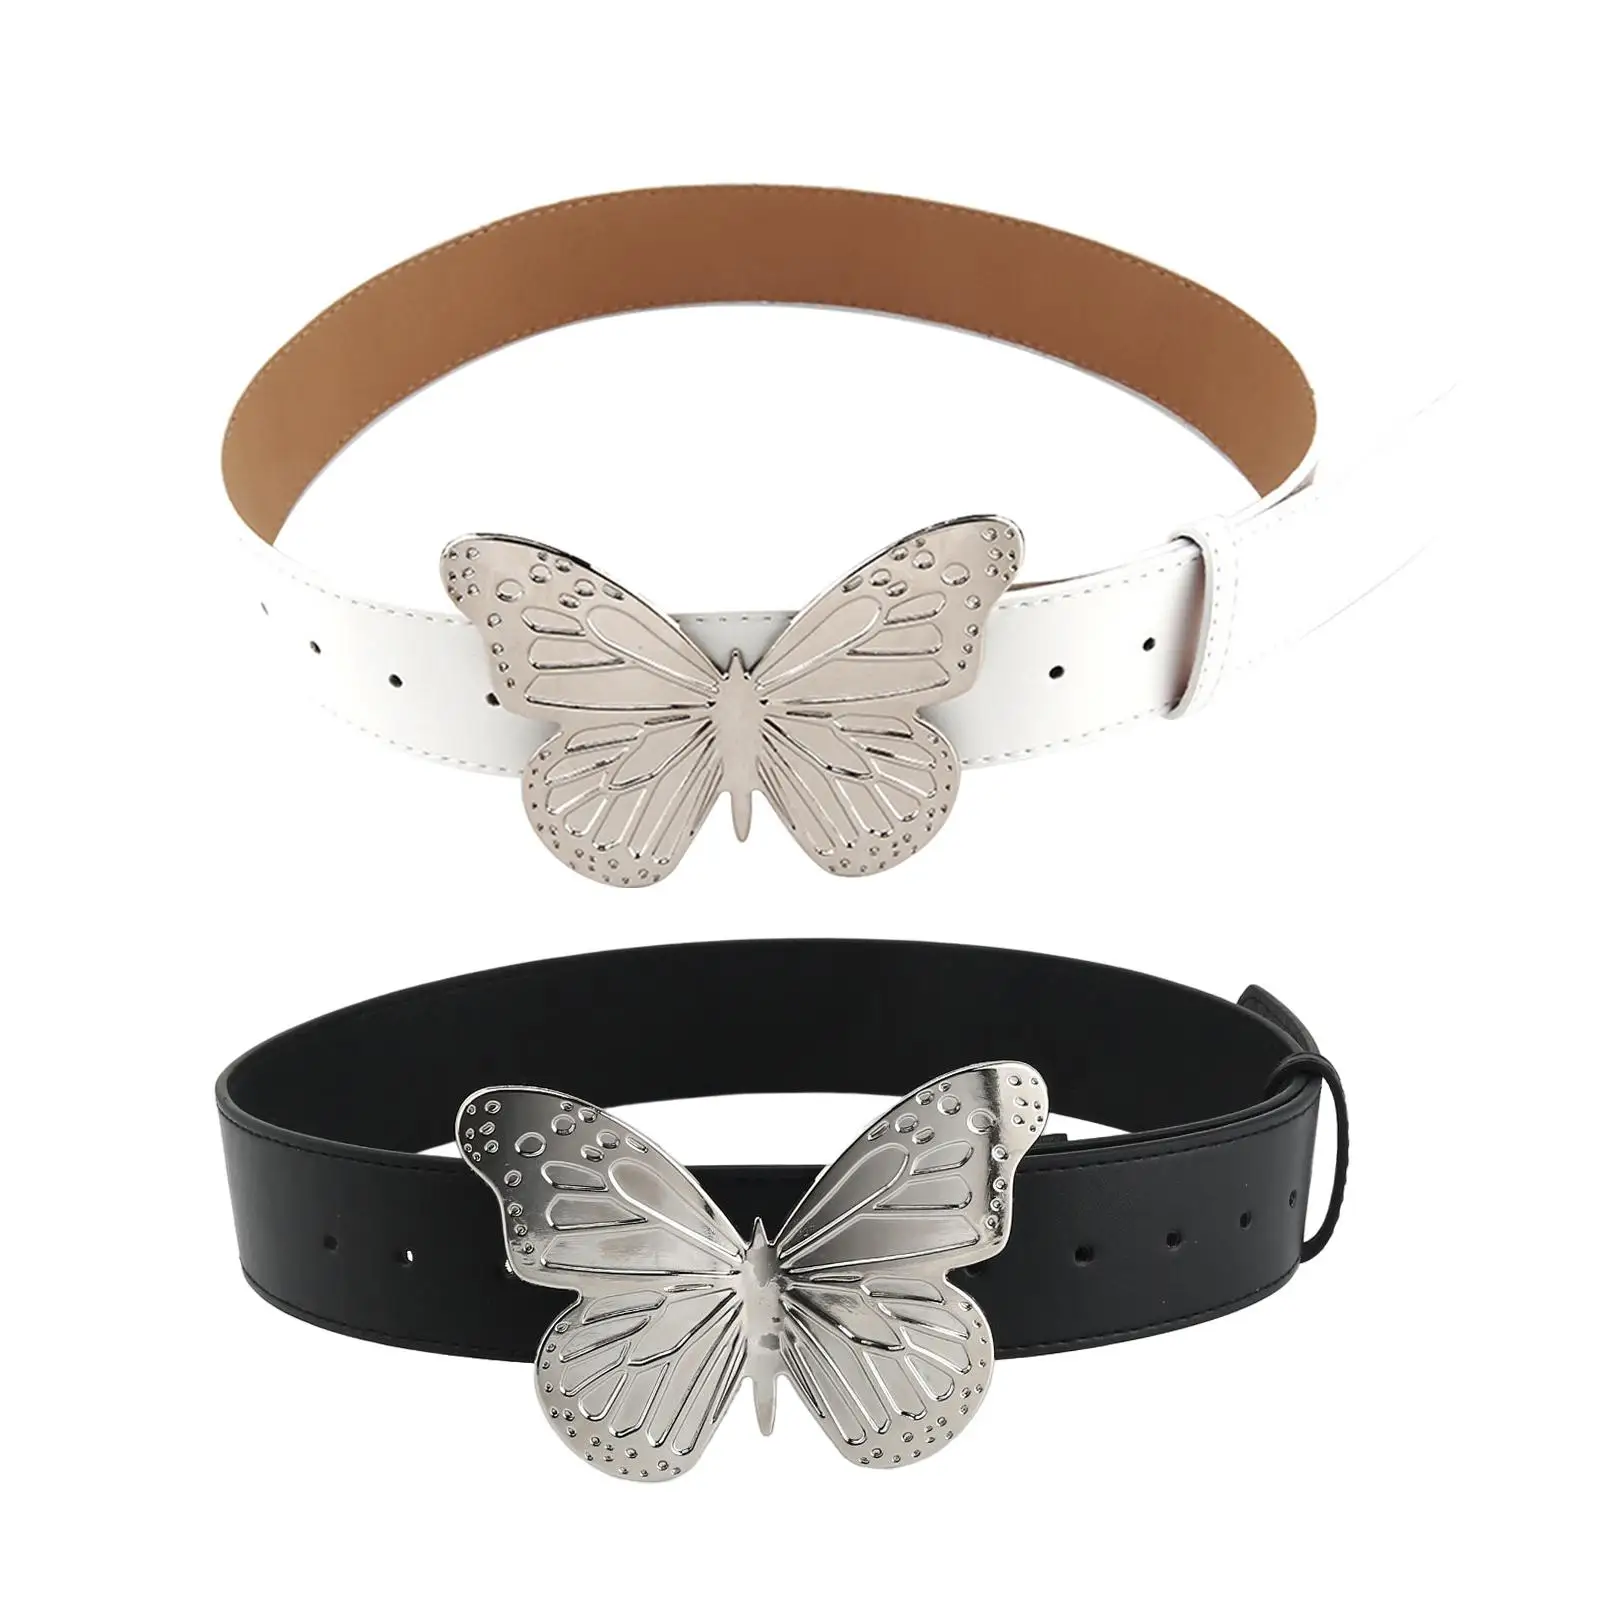 PU Leather Women Belts with Butterfly Buckle Ladies Waist Belt for Ladies